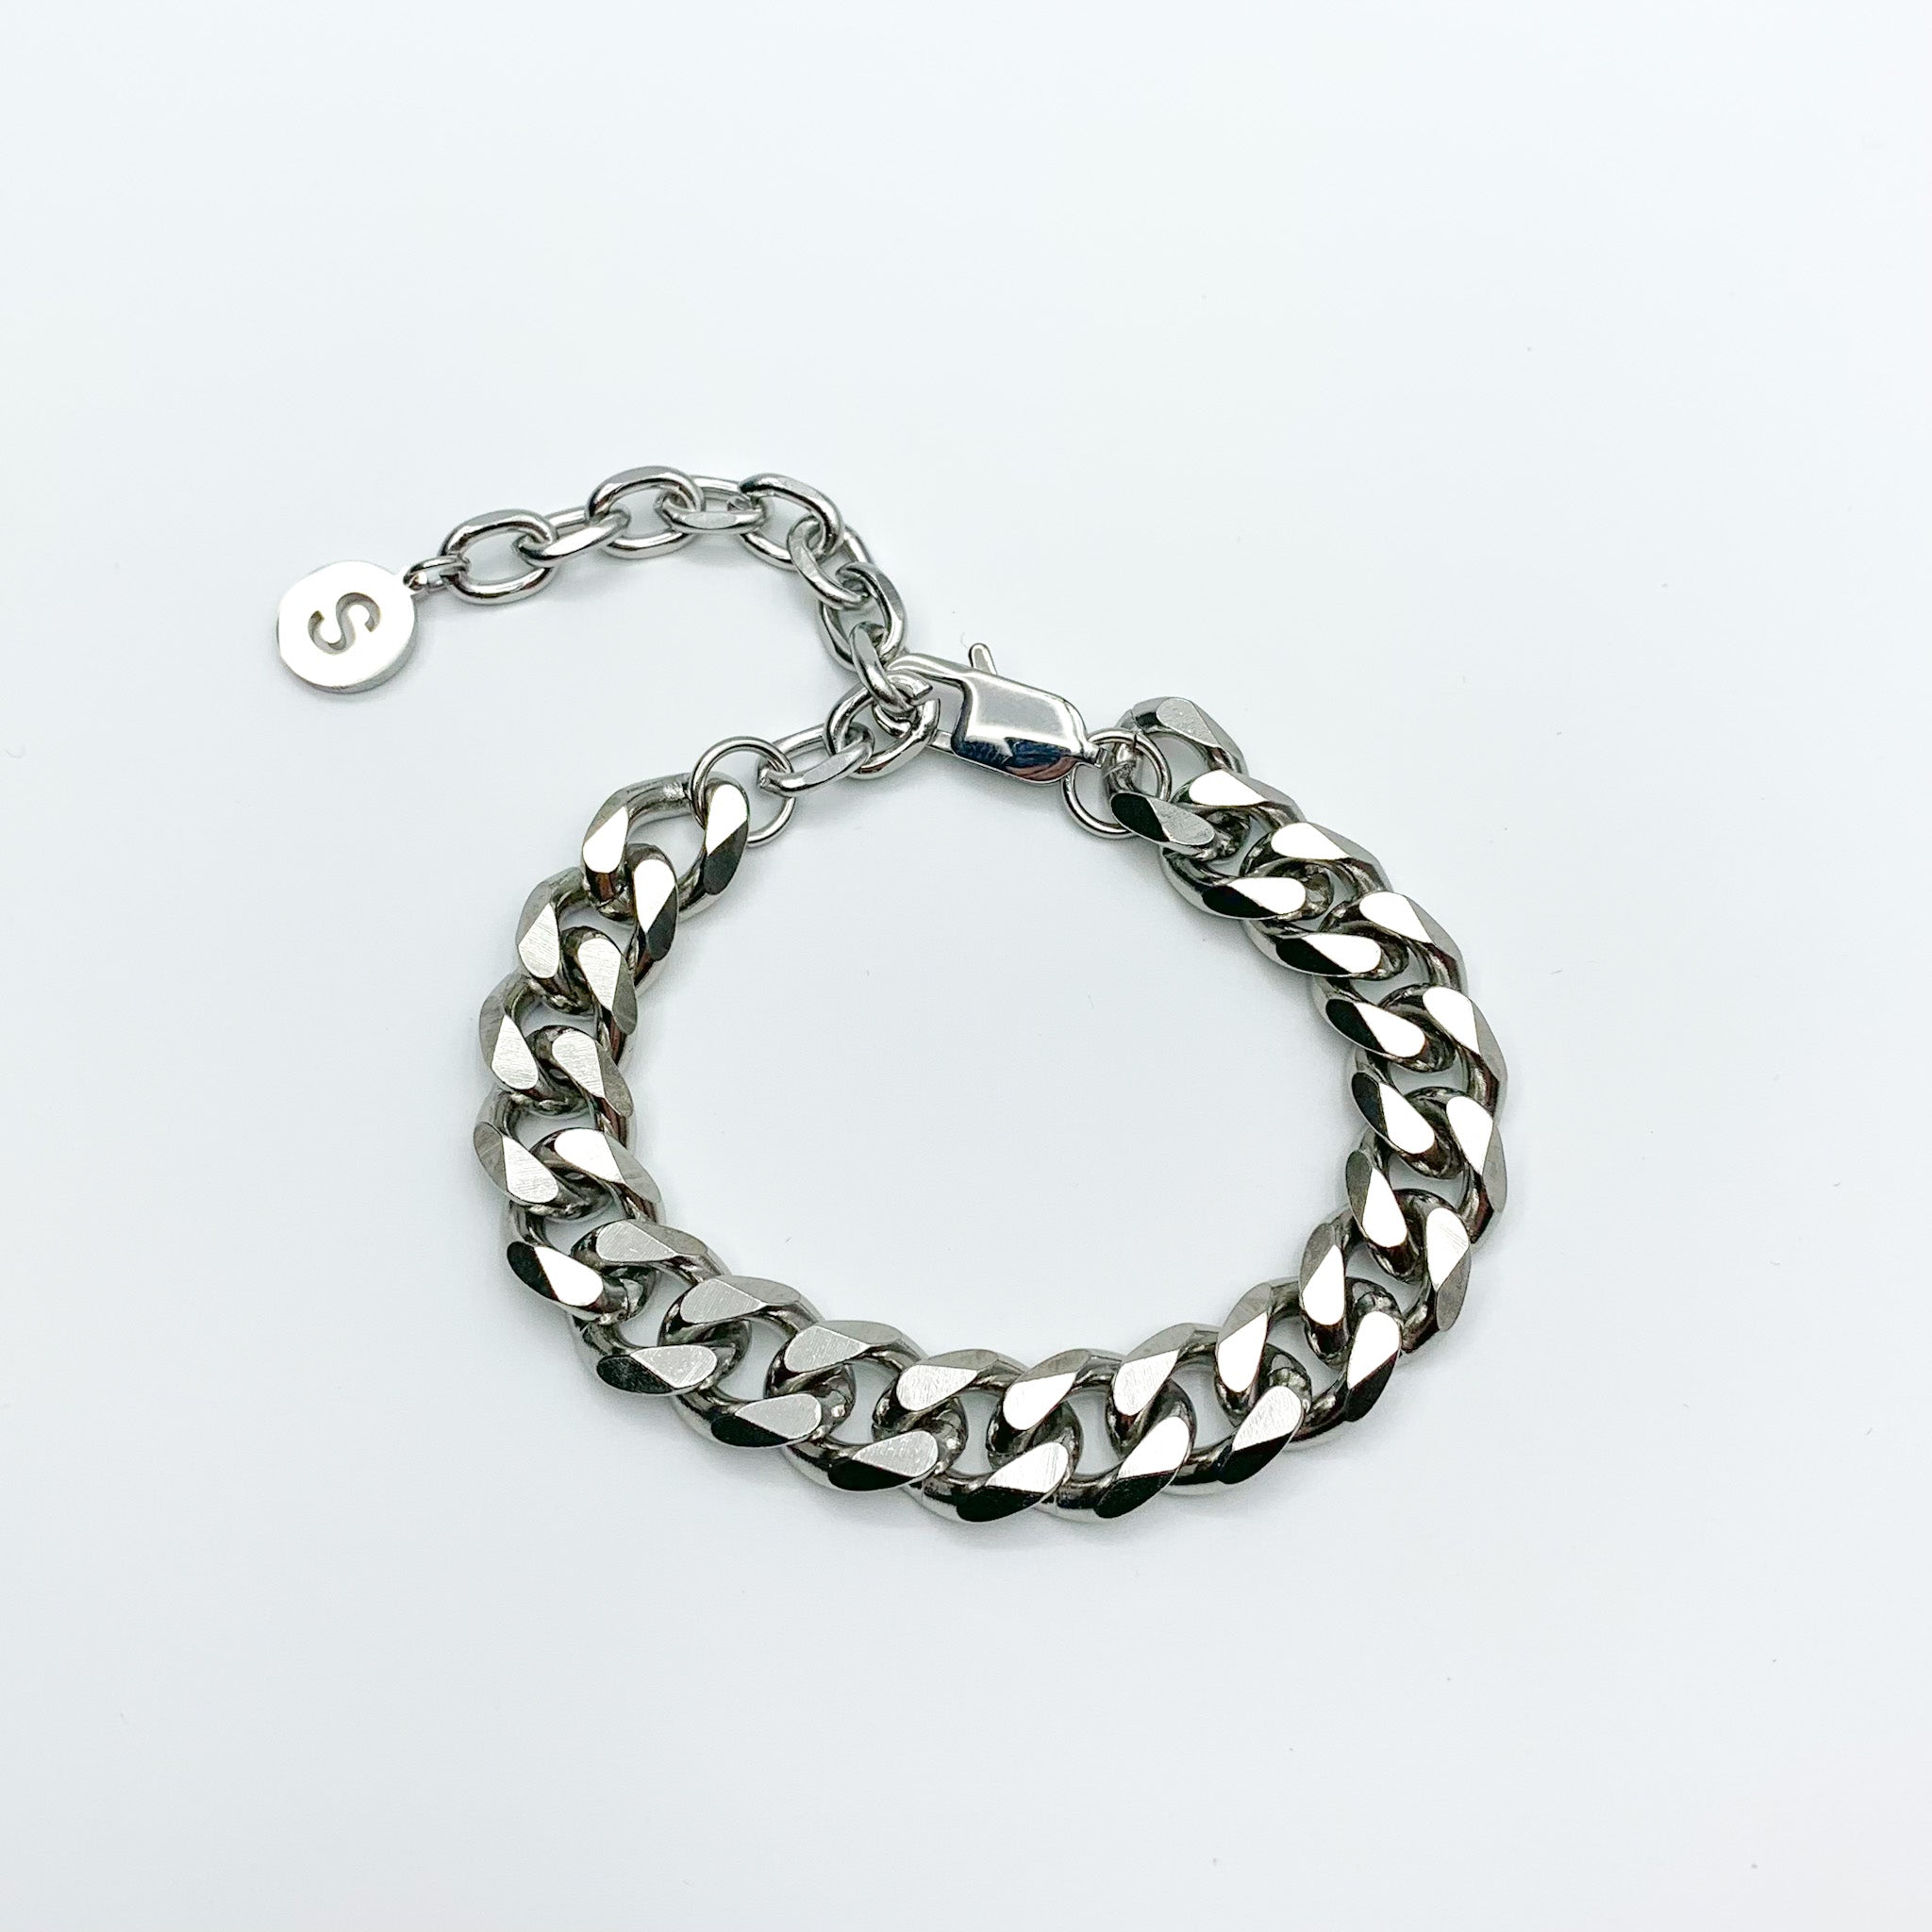 High-quality Stainless Steel Cuban Link 3.0 Bracelet, a timeless and waterproof accessory, adjustable from 17cm to 23cm. Enjoy this durable and stylish piece that complements your everyday look with a link width of 11cm.